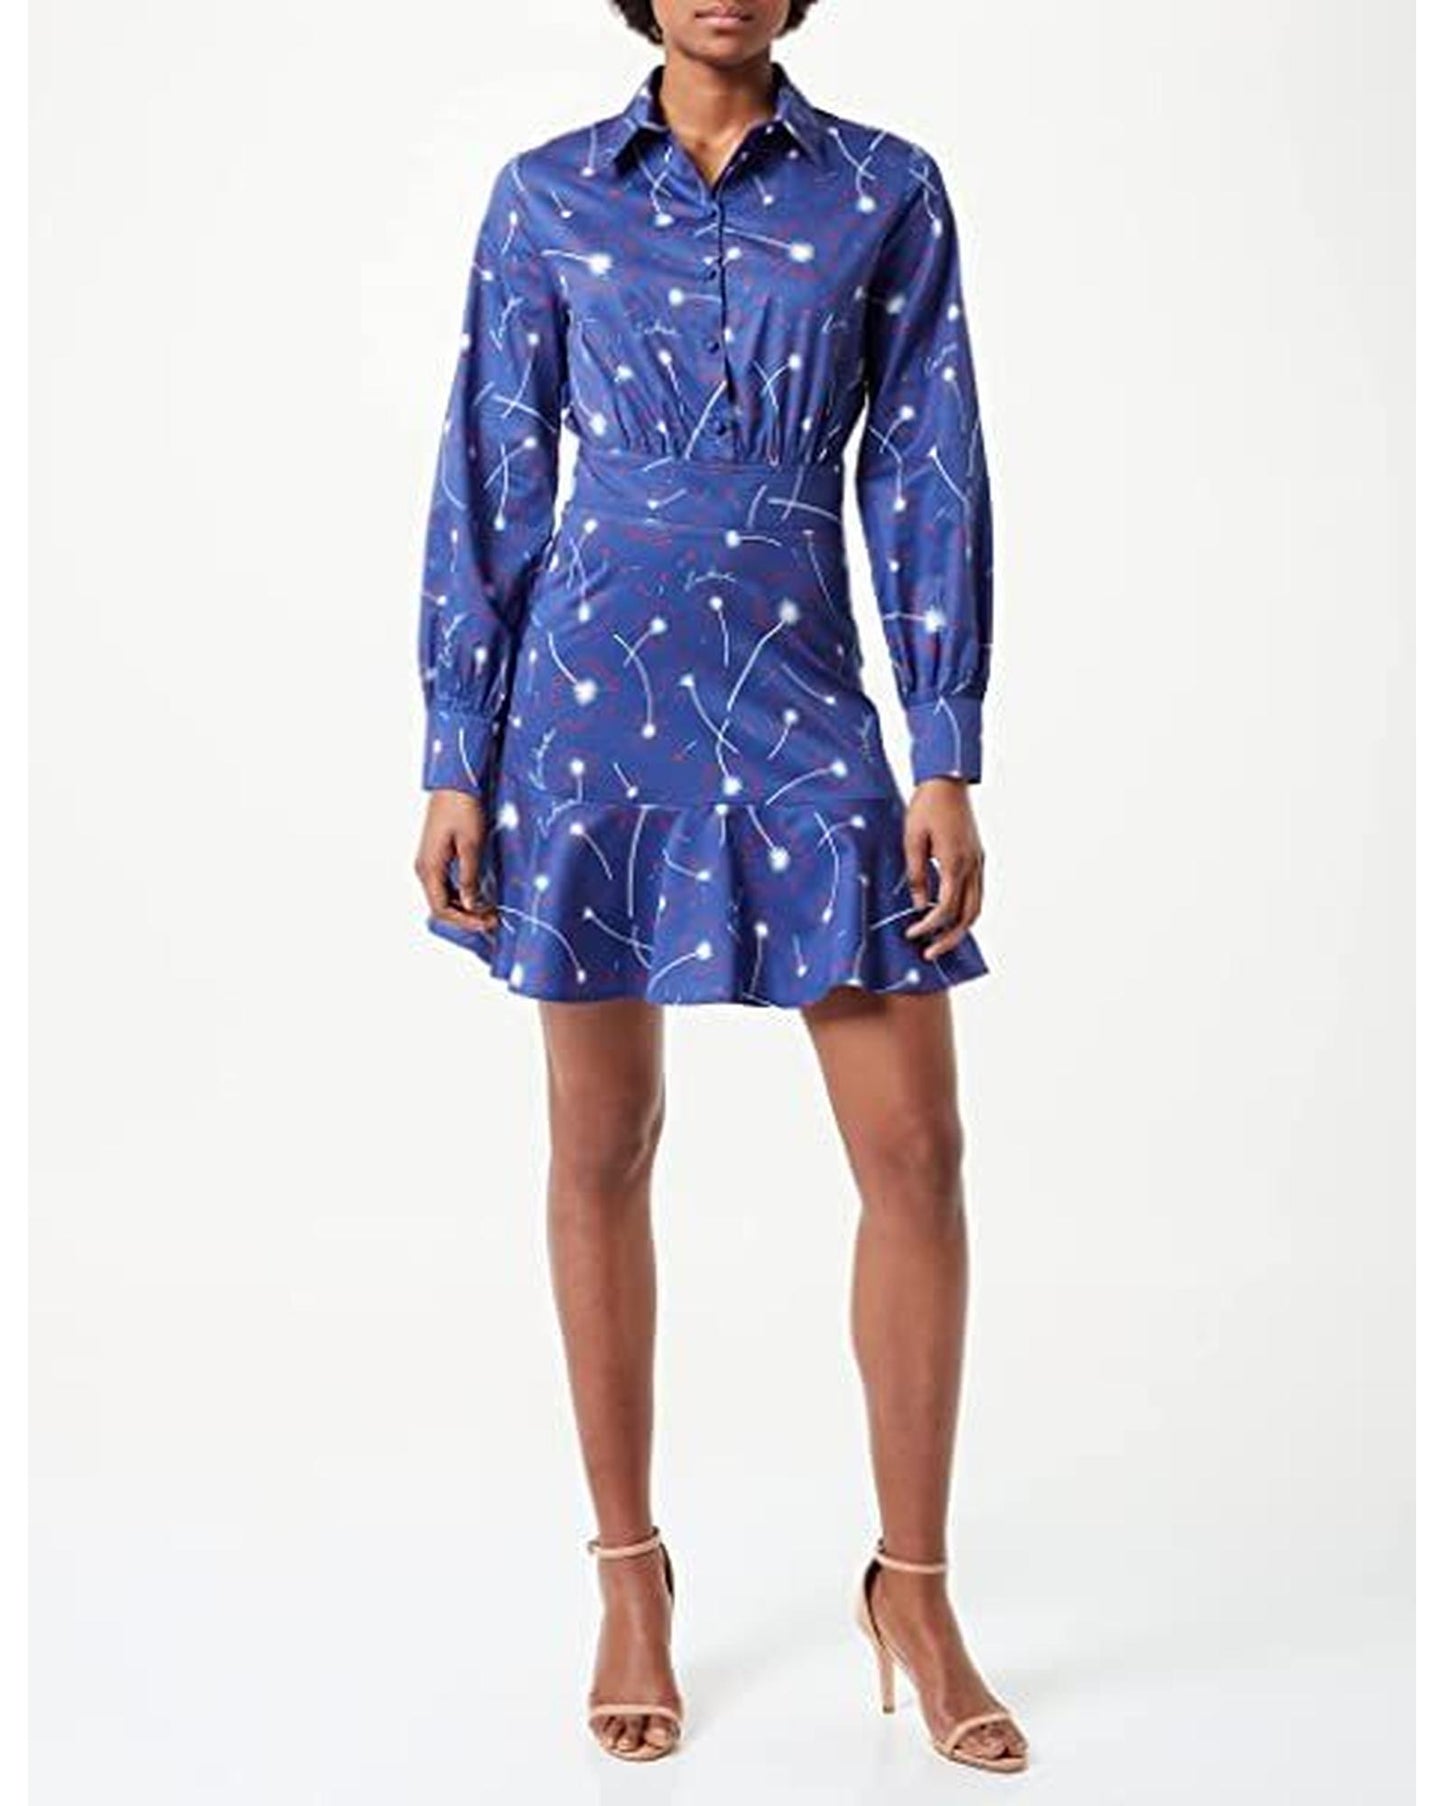 Abstract Print Shirt Collar Cotton Dress with Long Sleeves 42 IT Women